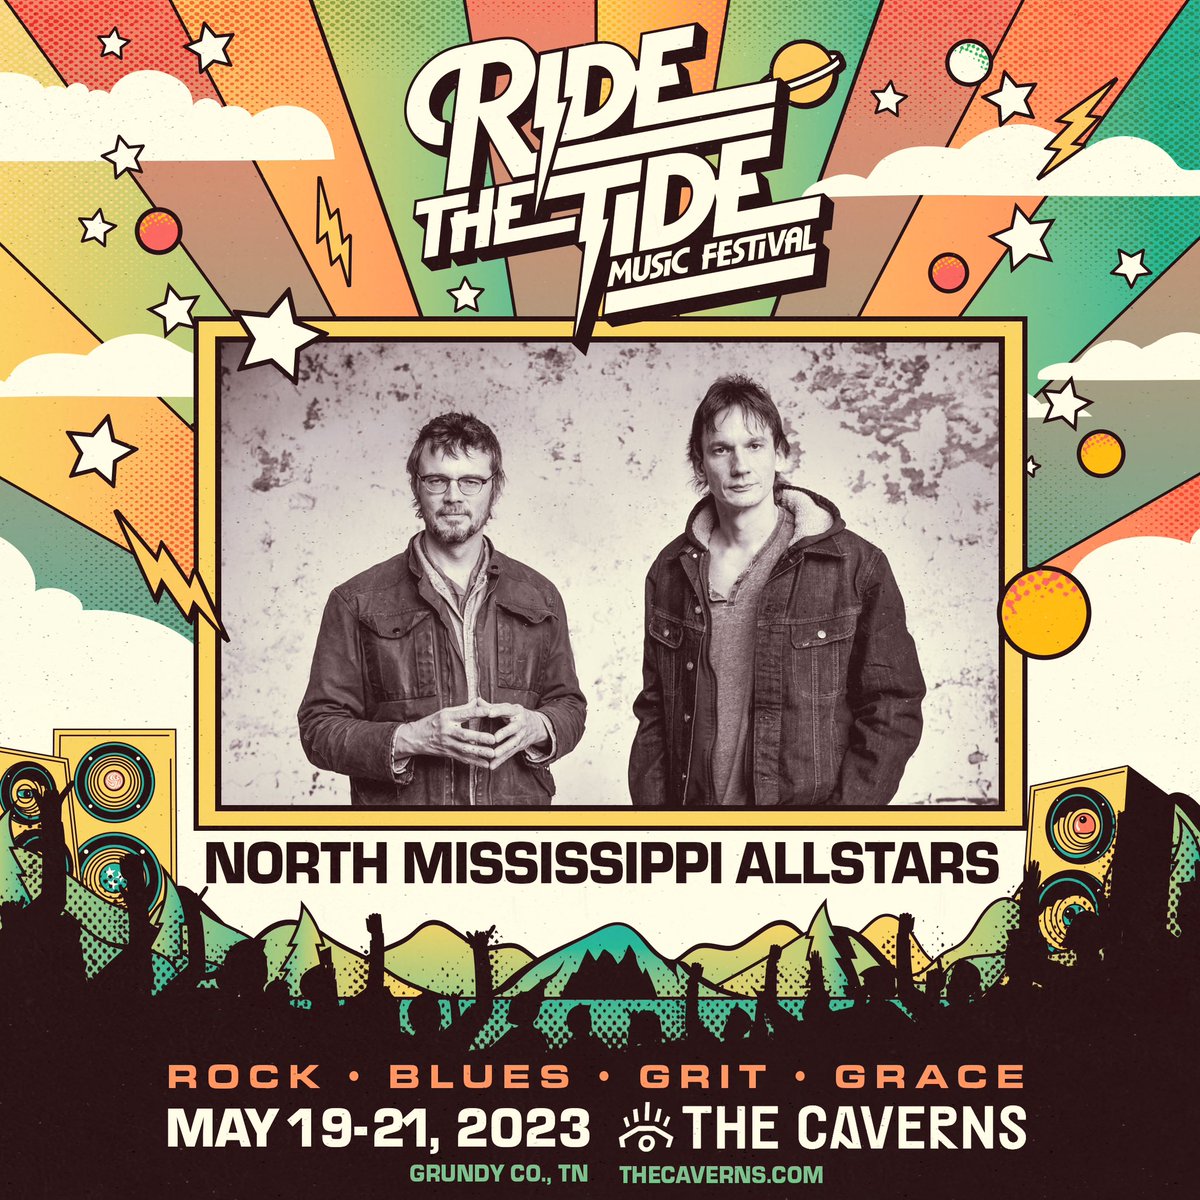 Getting ready for Ride The Tide this weekend at The Caverns in Grundy County, TN! Limited 3-day passes and single-day tickets available now at TheCaverns.com